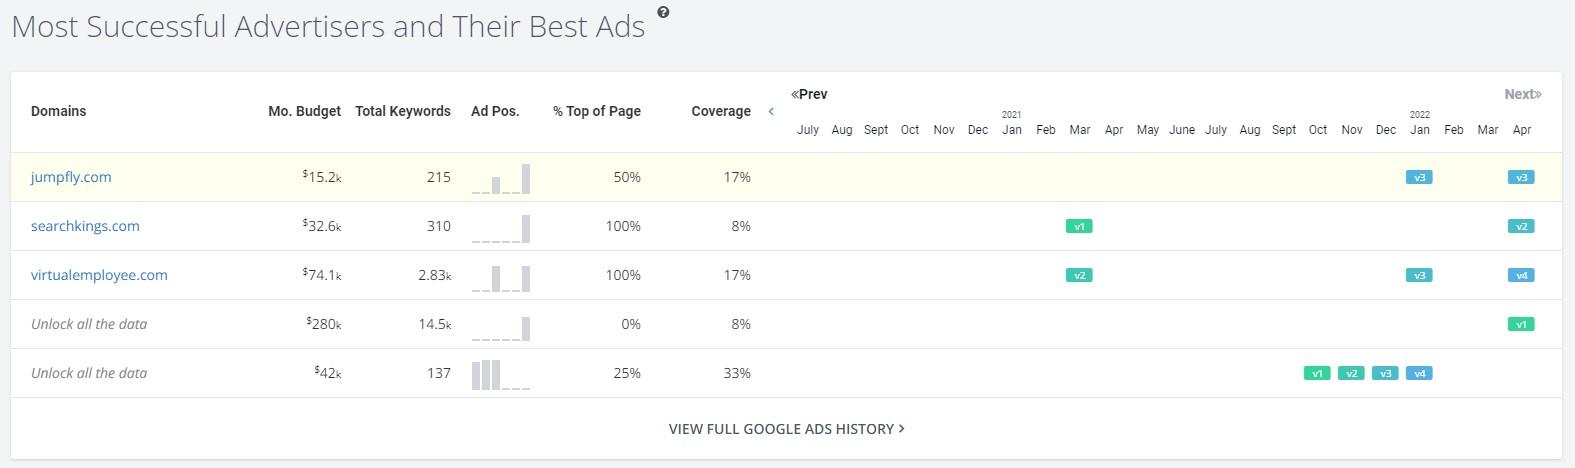 SpyFu Most Successful Advertisers Report for Competitive Google Ads Analysis